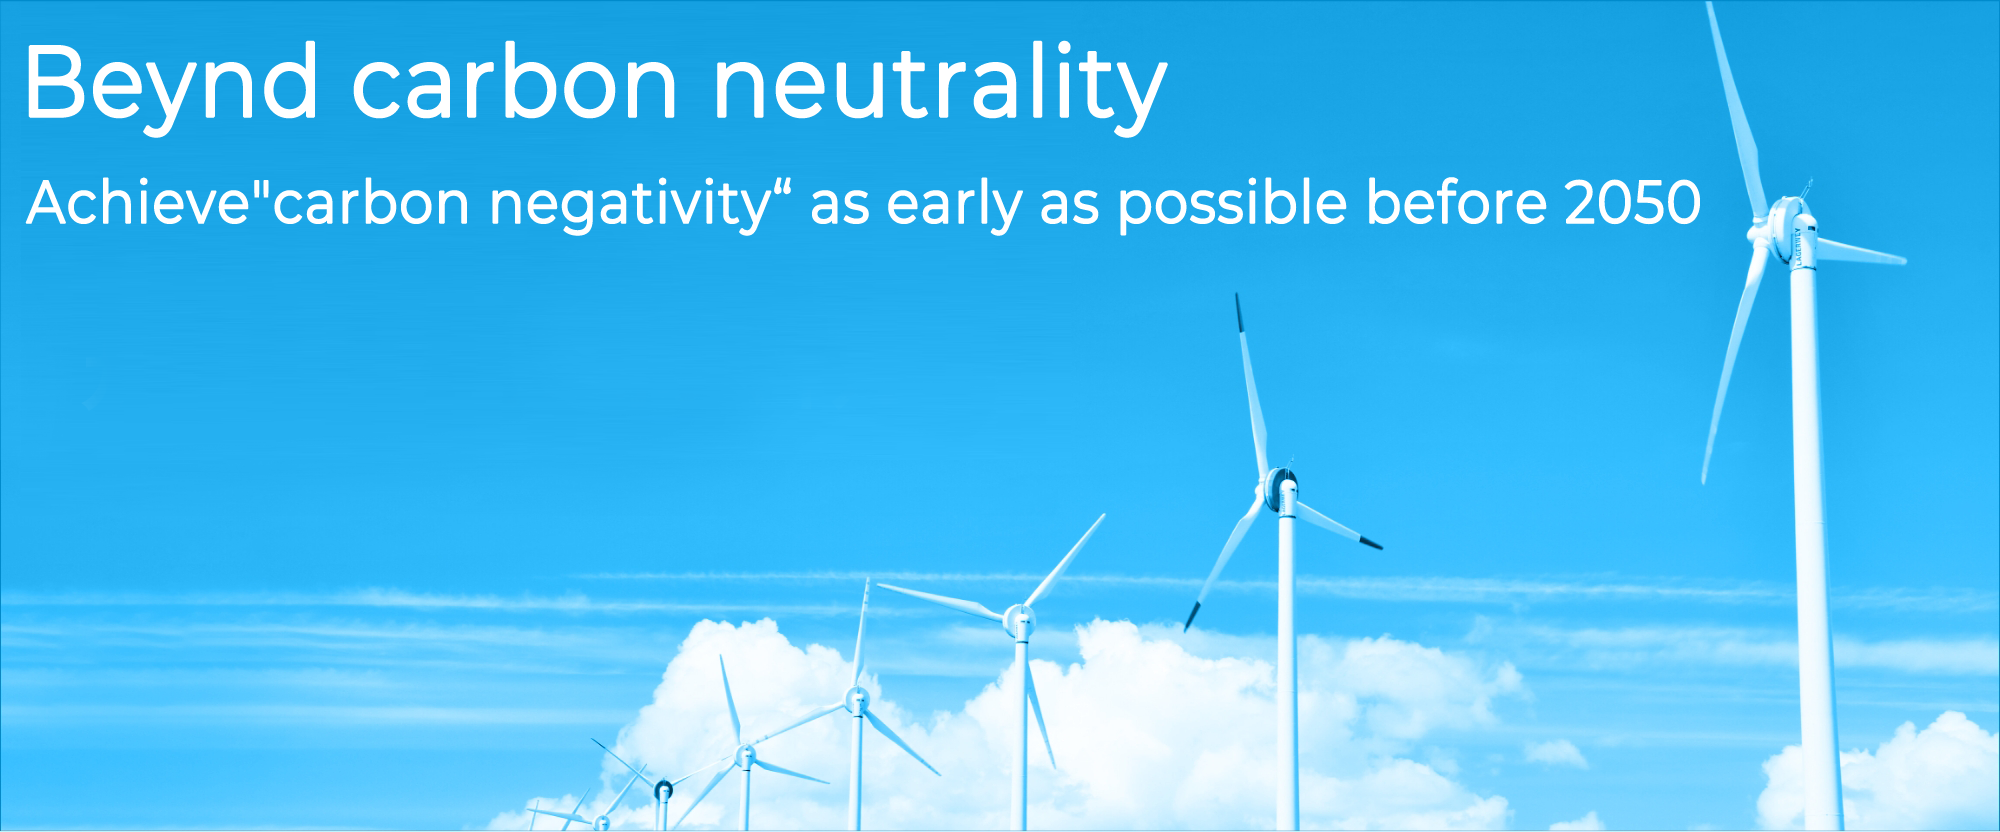 Beynd carbon neutrality Achieve carbon negativity as early as possible before 2050